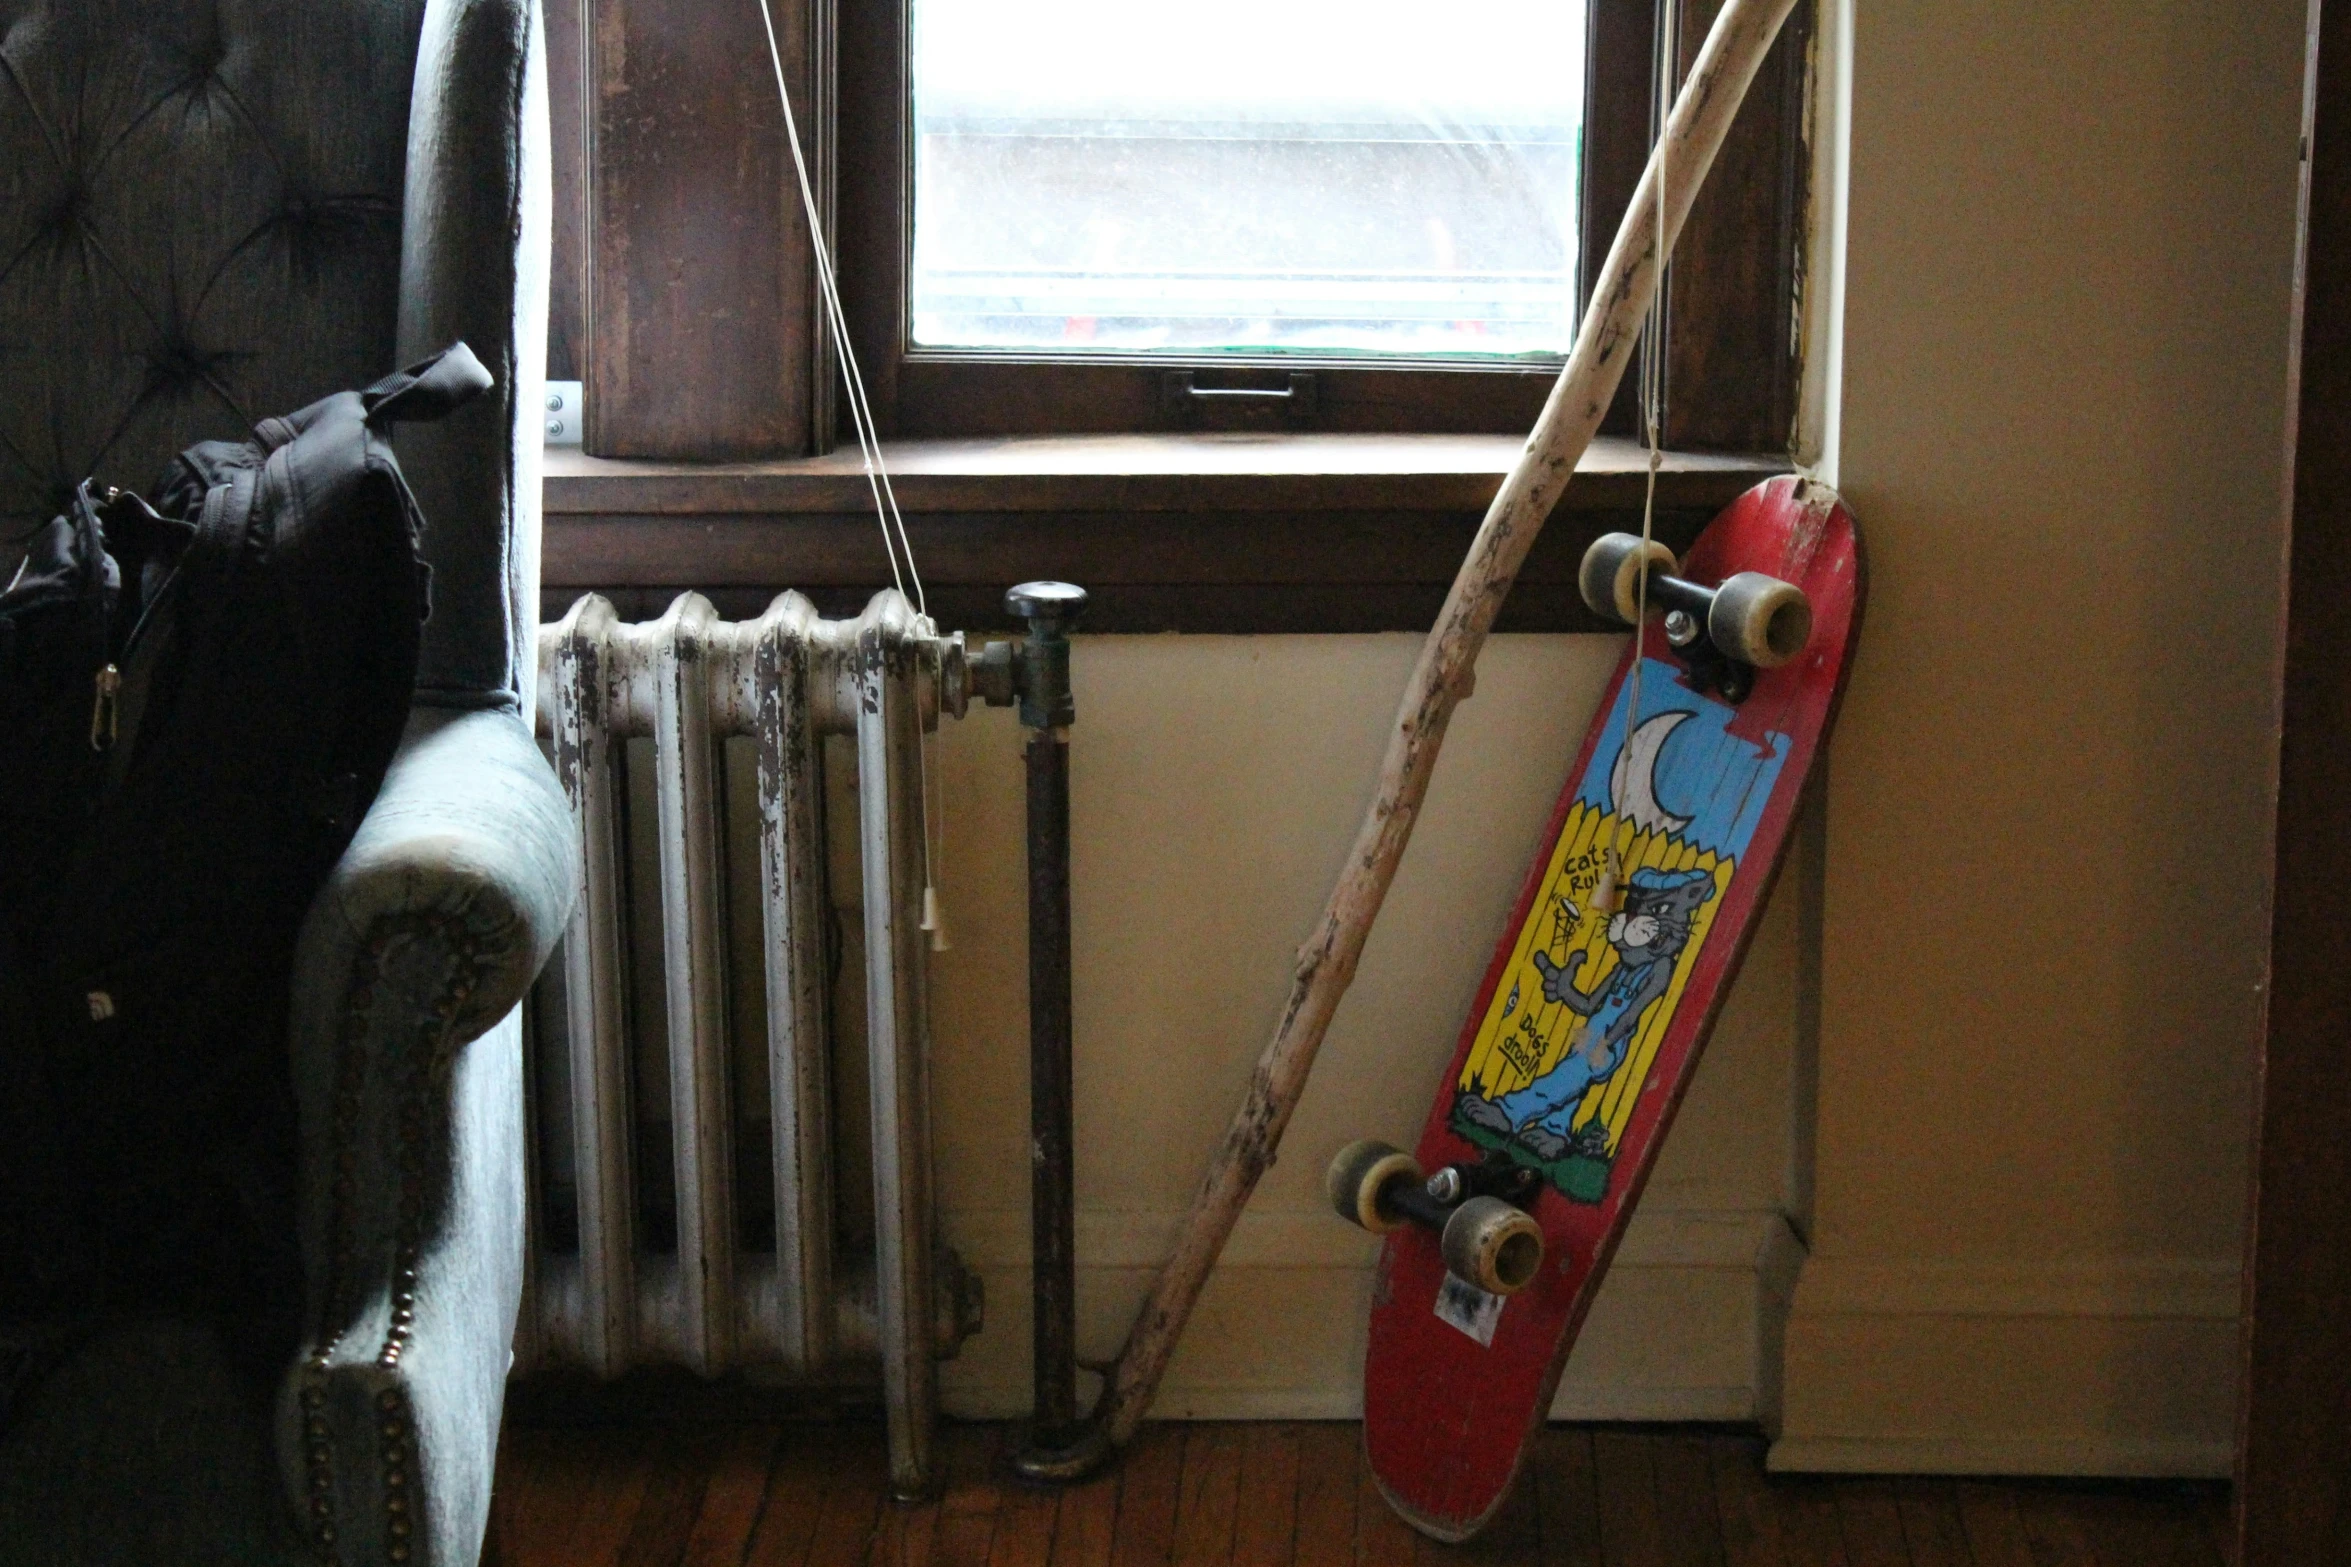 a skateboard rests in front of an old radiator